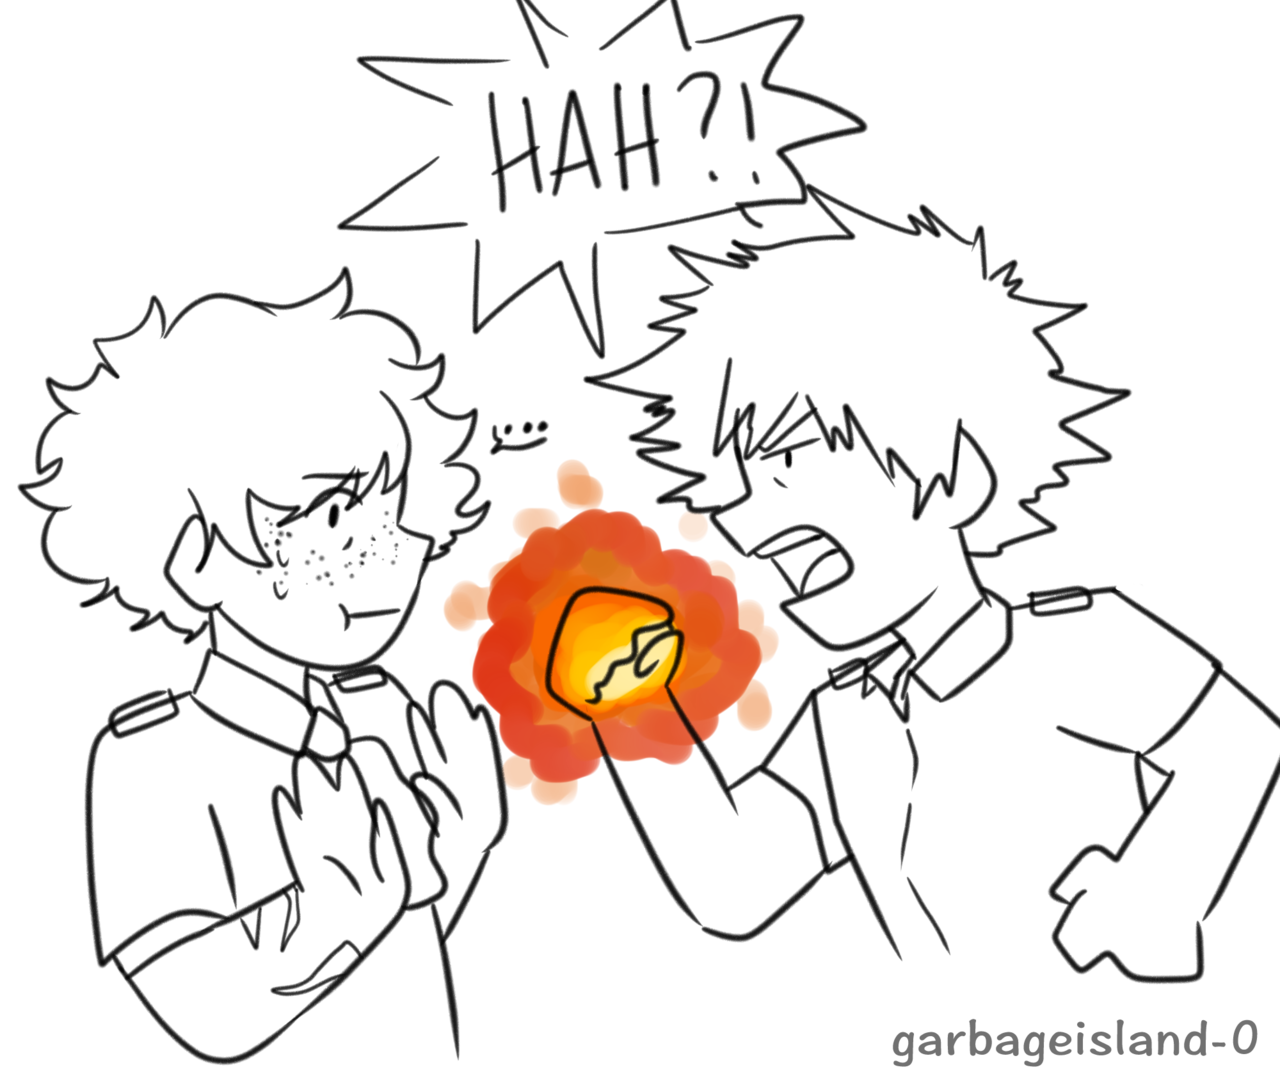 An "Art" Blog (Every time I look at Bakugou’s face, I bust out...)